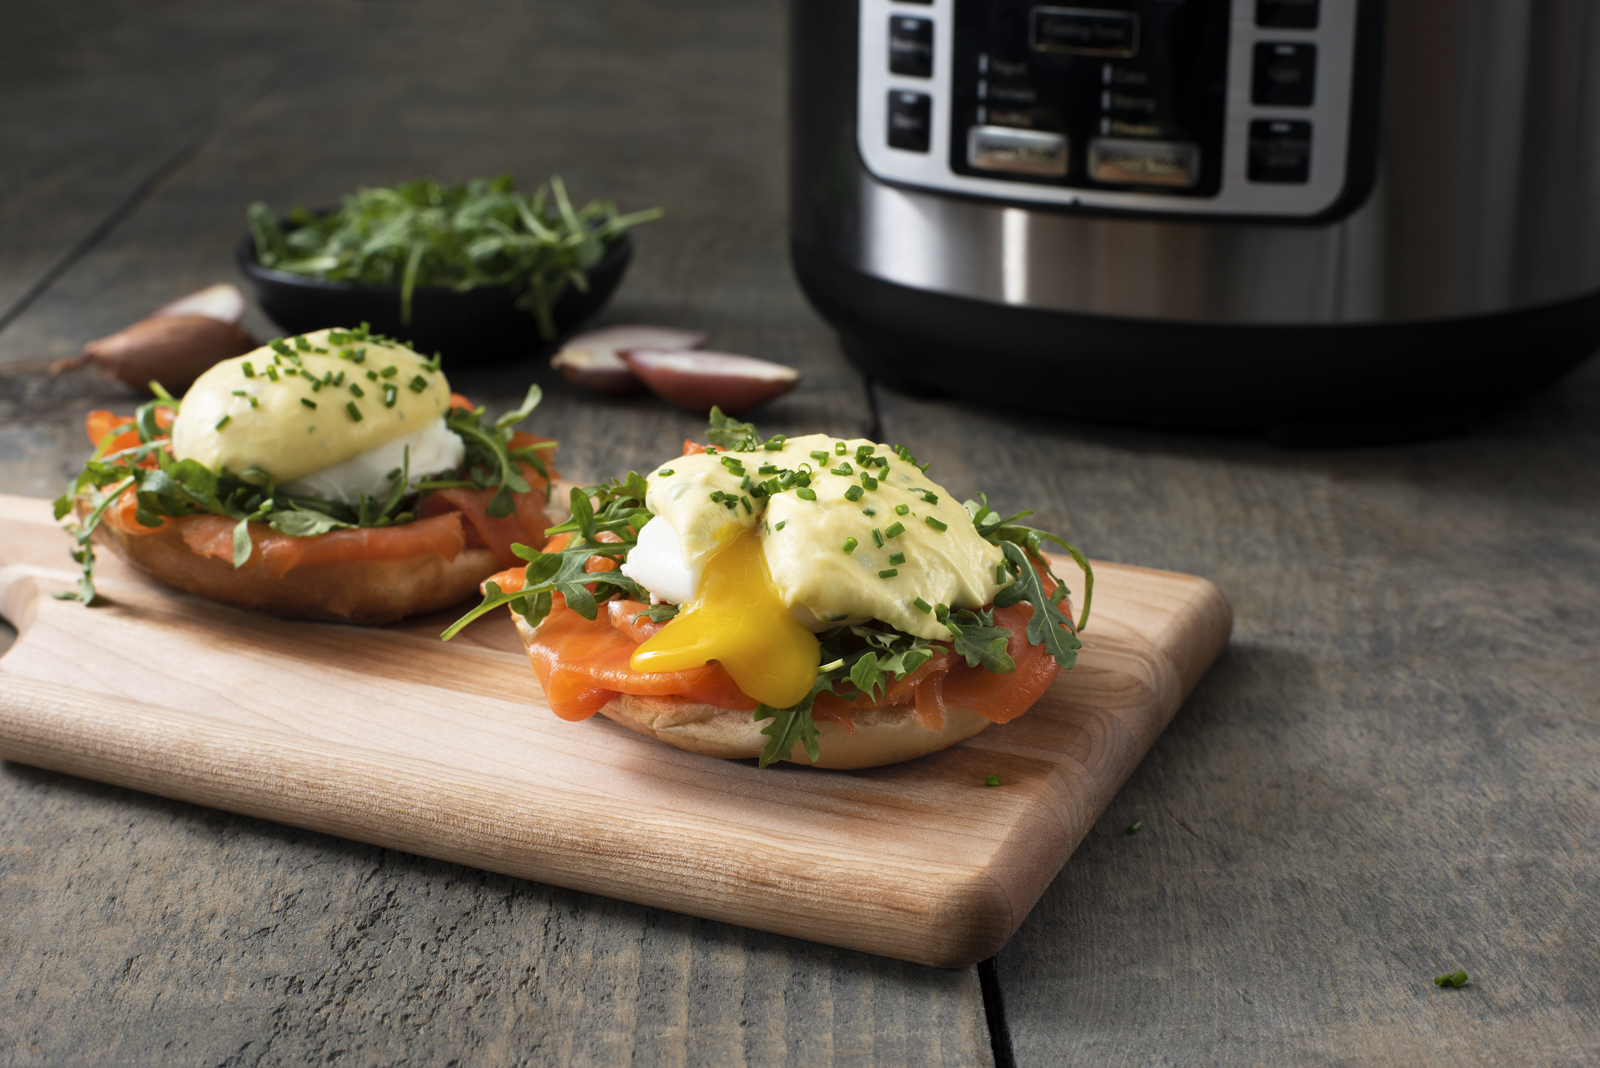 New multi cooker makes sous vide simple for the home cook [Image: Eggs Benedict in front of a multi cooker]